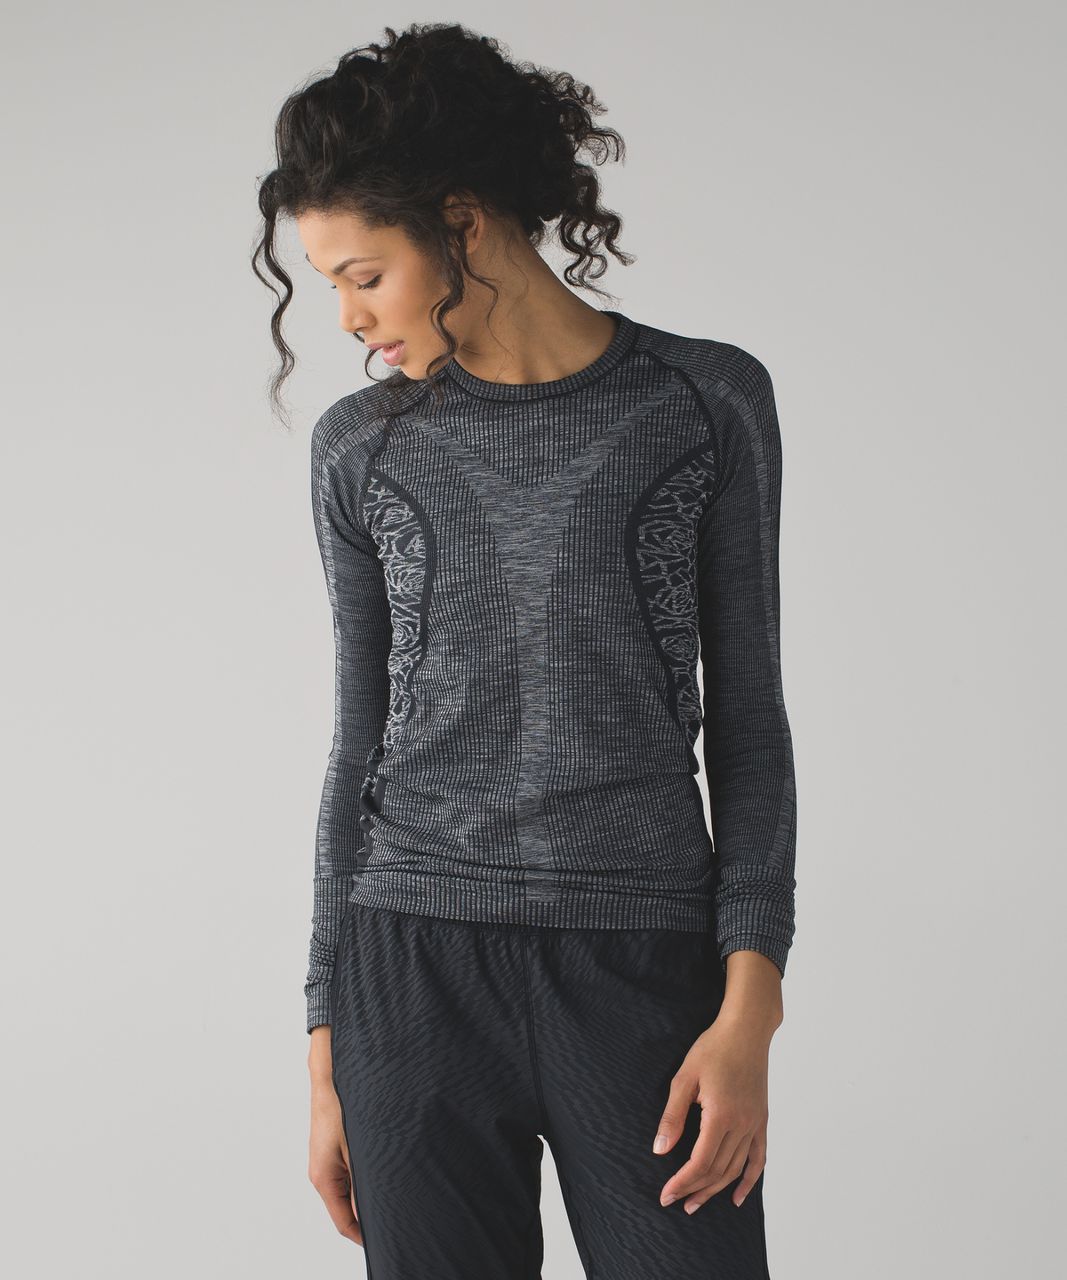 Lululemon Rest Less Pullover - Heathered Black (First Release)